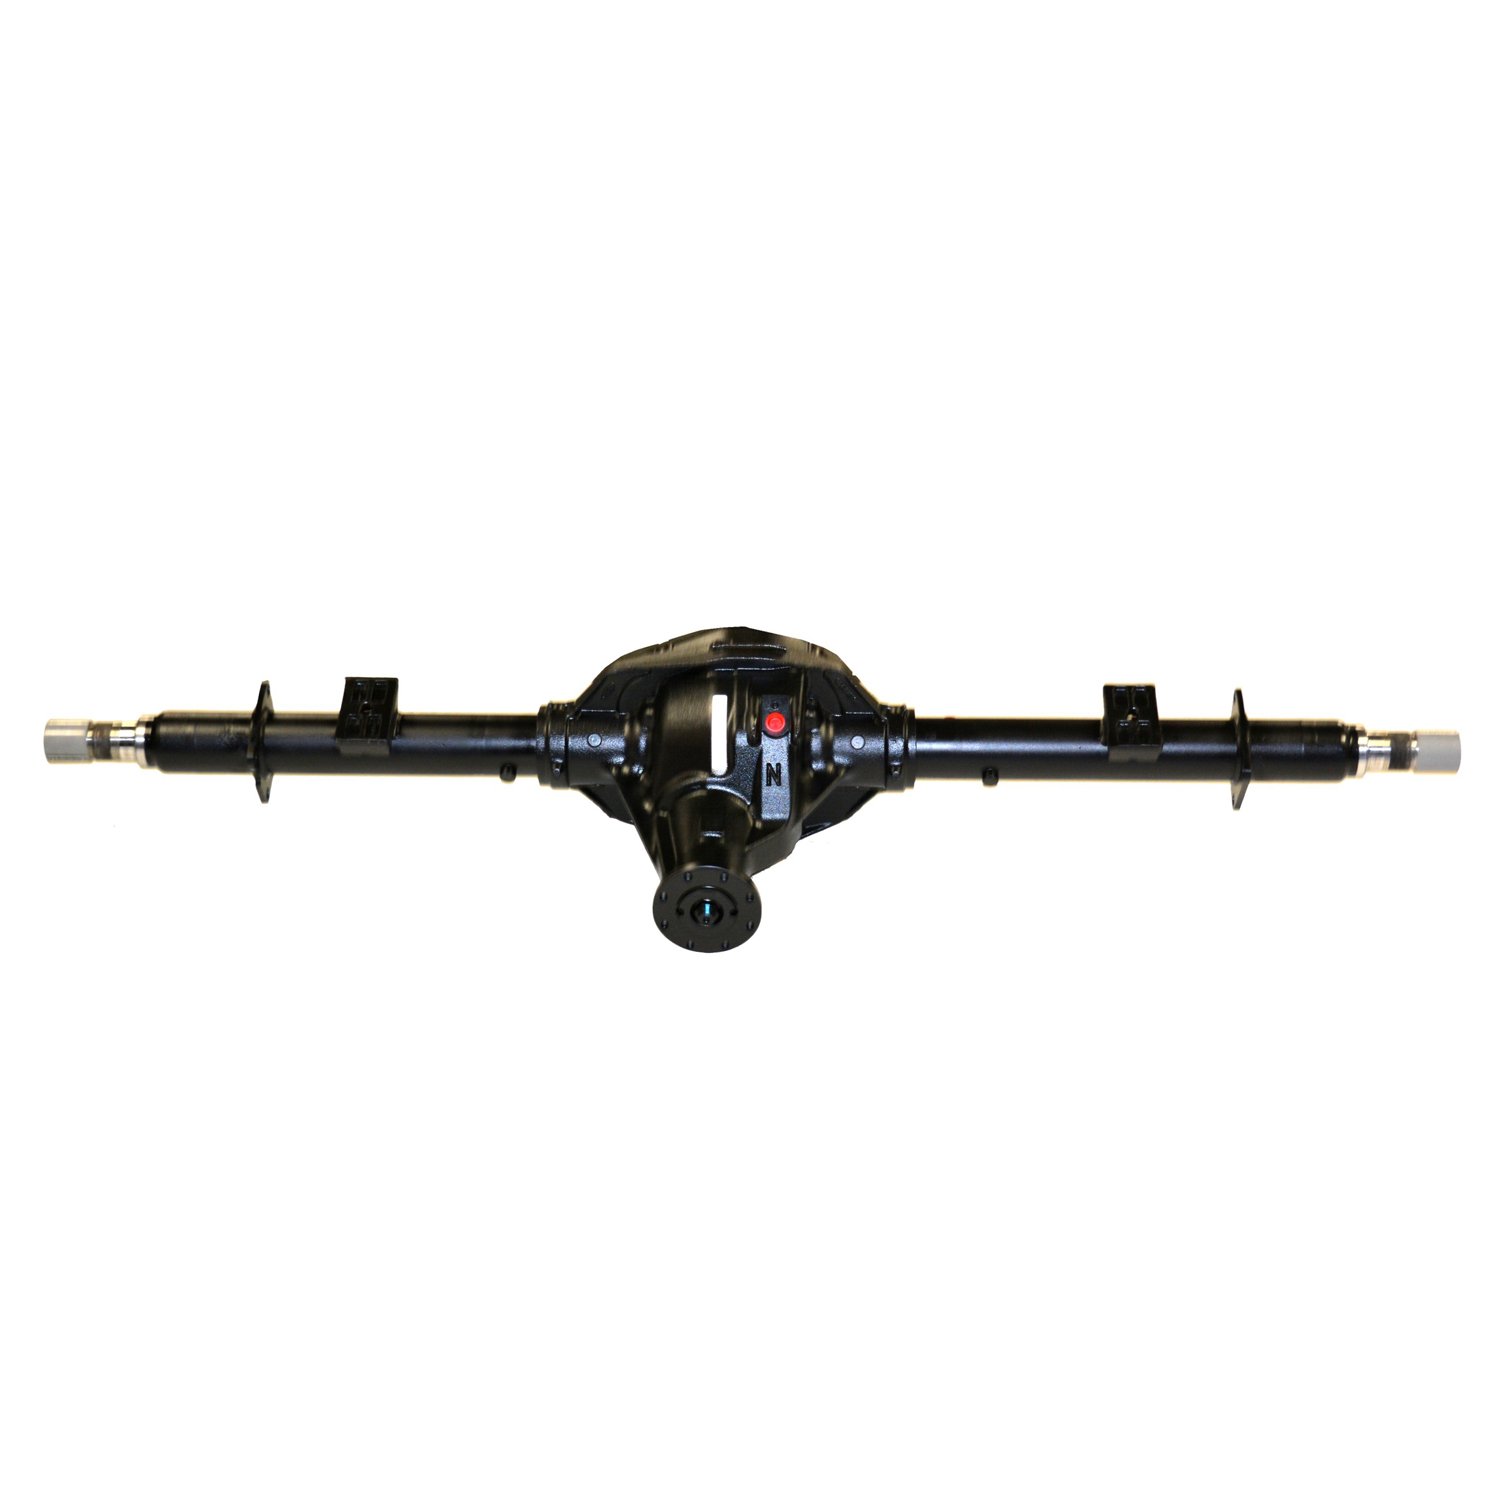 Remanufactured Axle Assy for 10.25" 87-97 F350 3.55 , ABS, DRW, Cab Chassis, Posi LSD